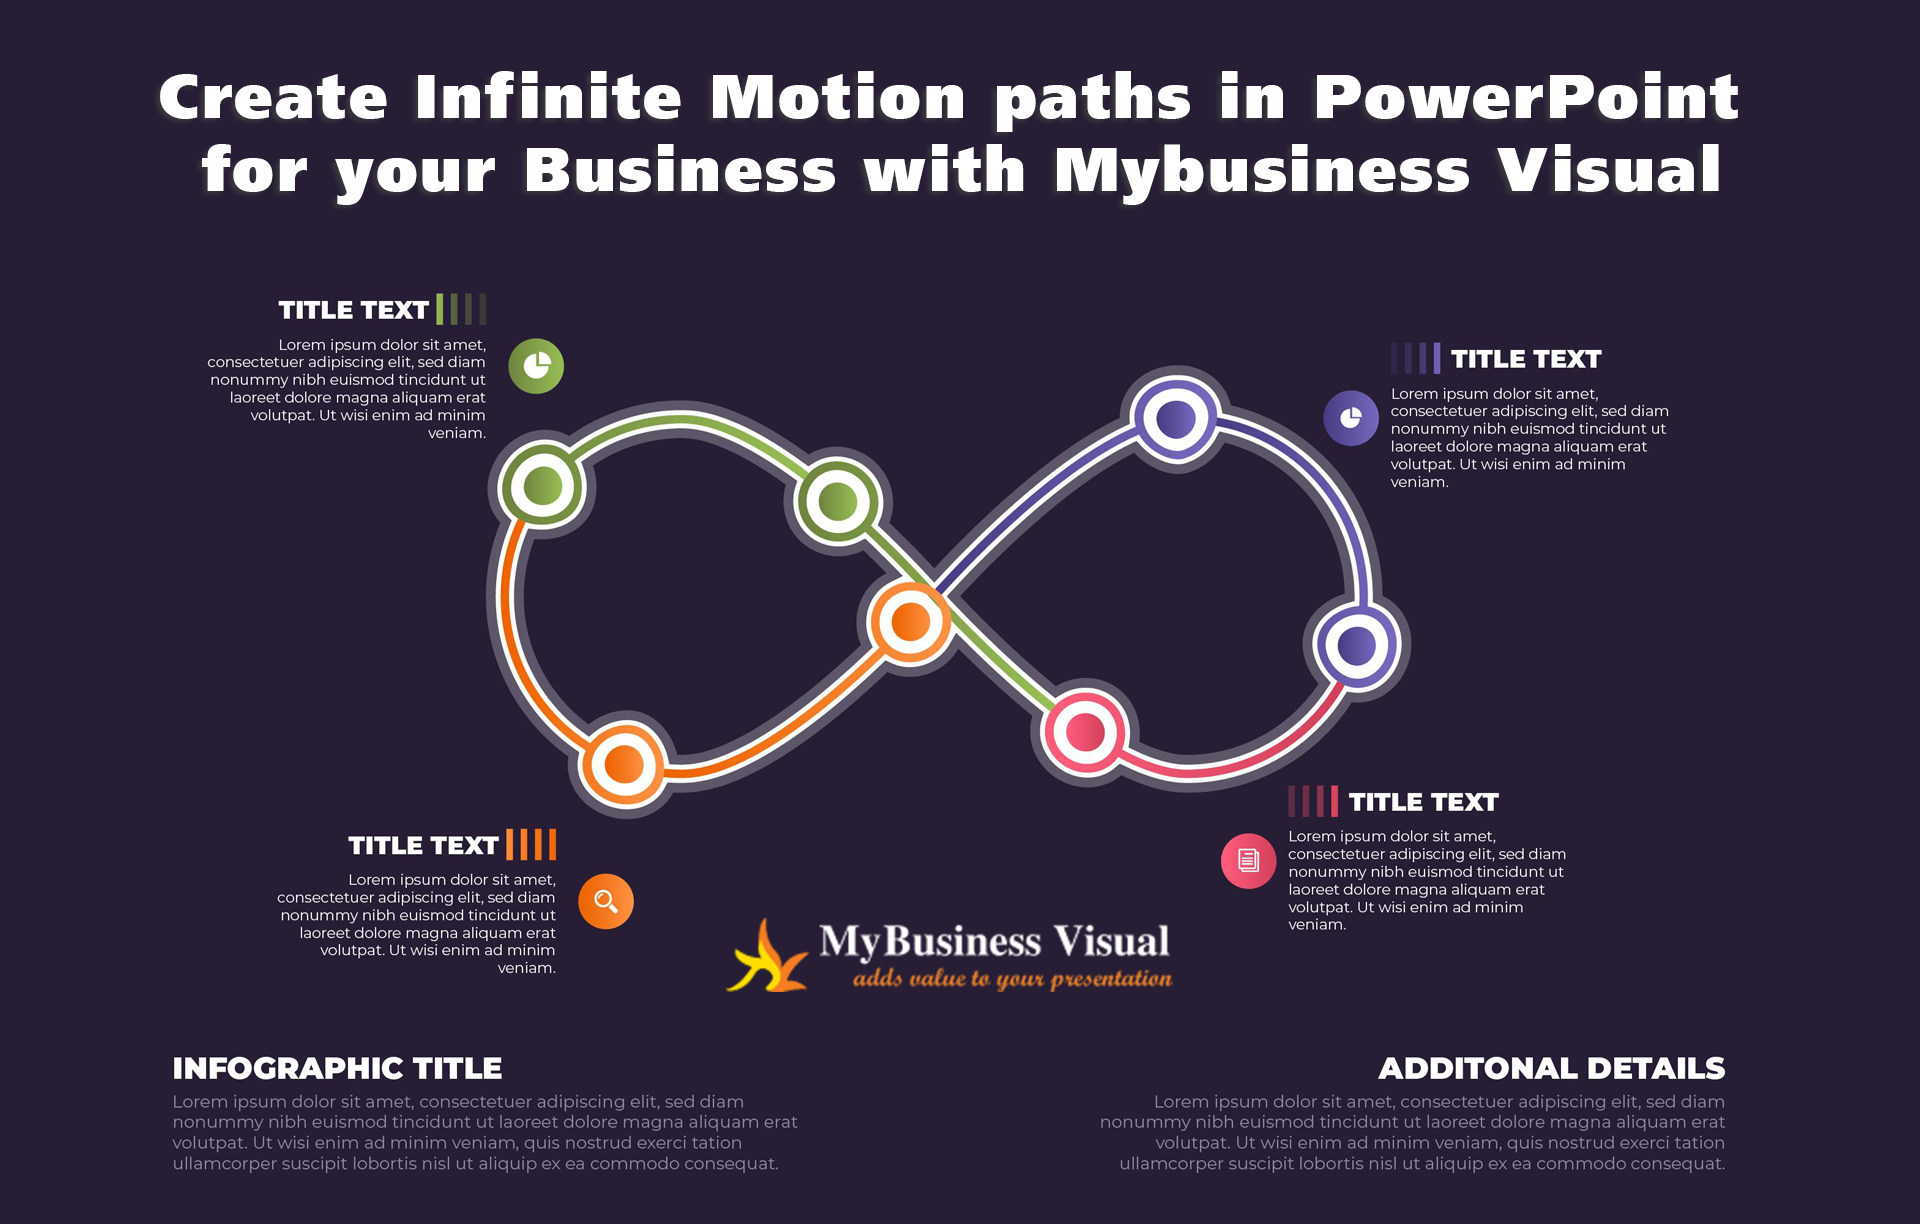 Create Infinite Motion paths in PowerPoint for your Business with Mybusiness Visual